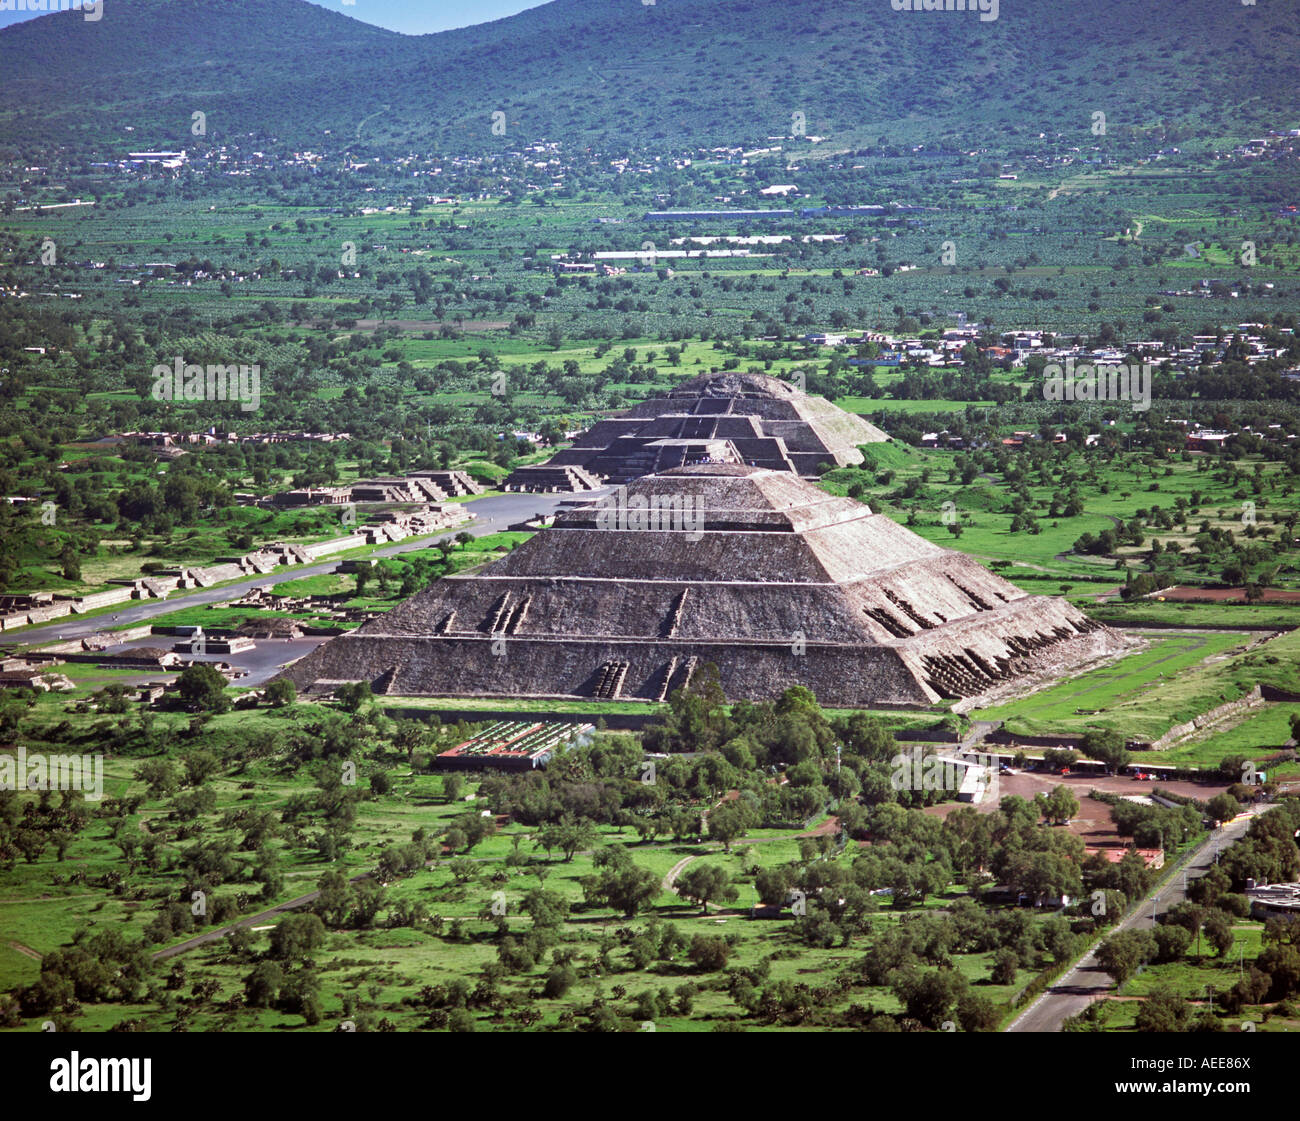 aerial above Aztec, Teotihuacan pyramids, Mexico, Mexico city, Pyramid of the Moon and Pyramid of the Sun Stock Photo